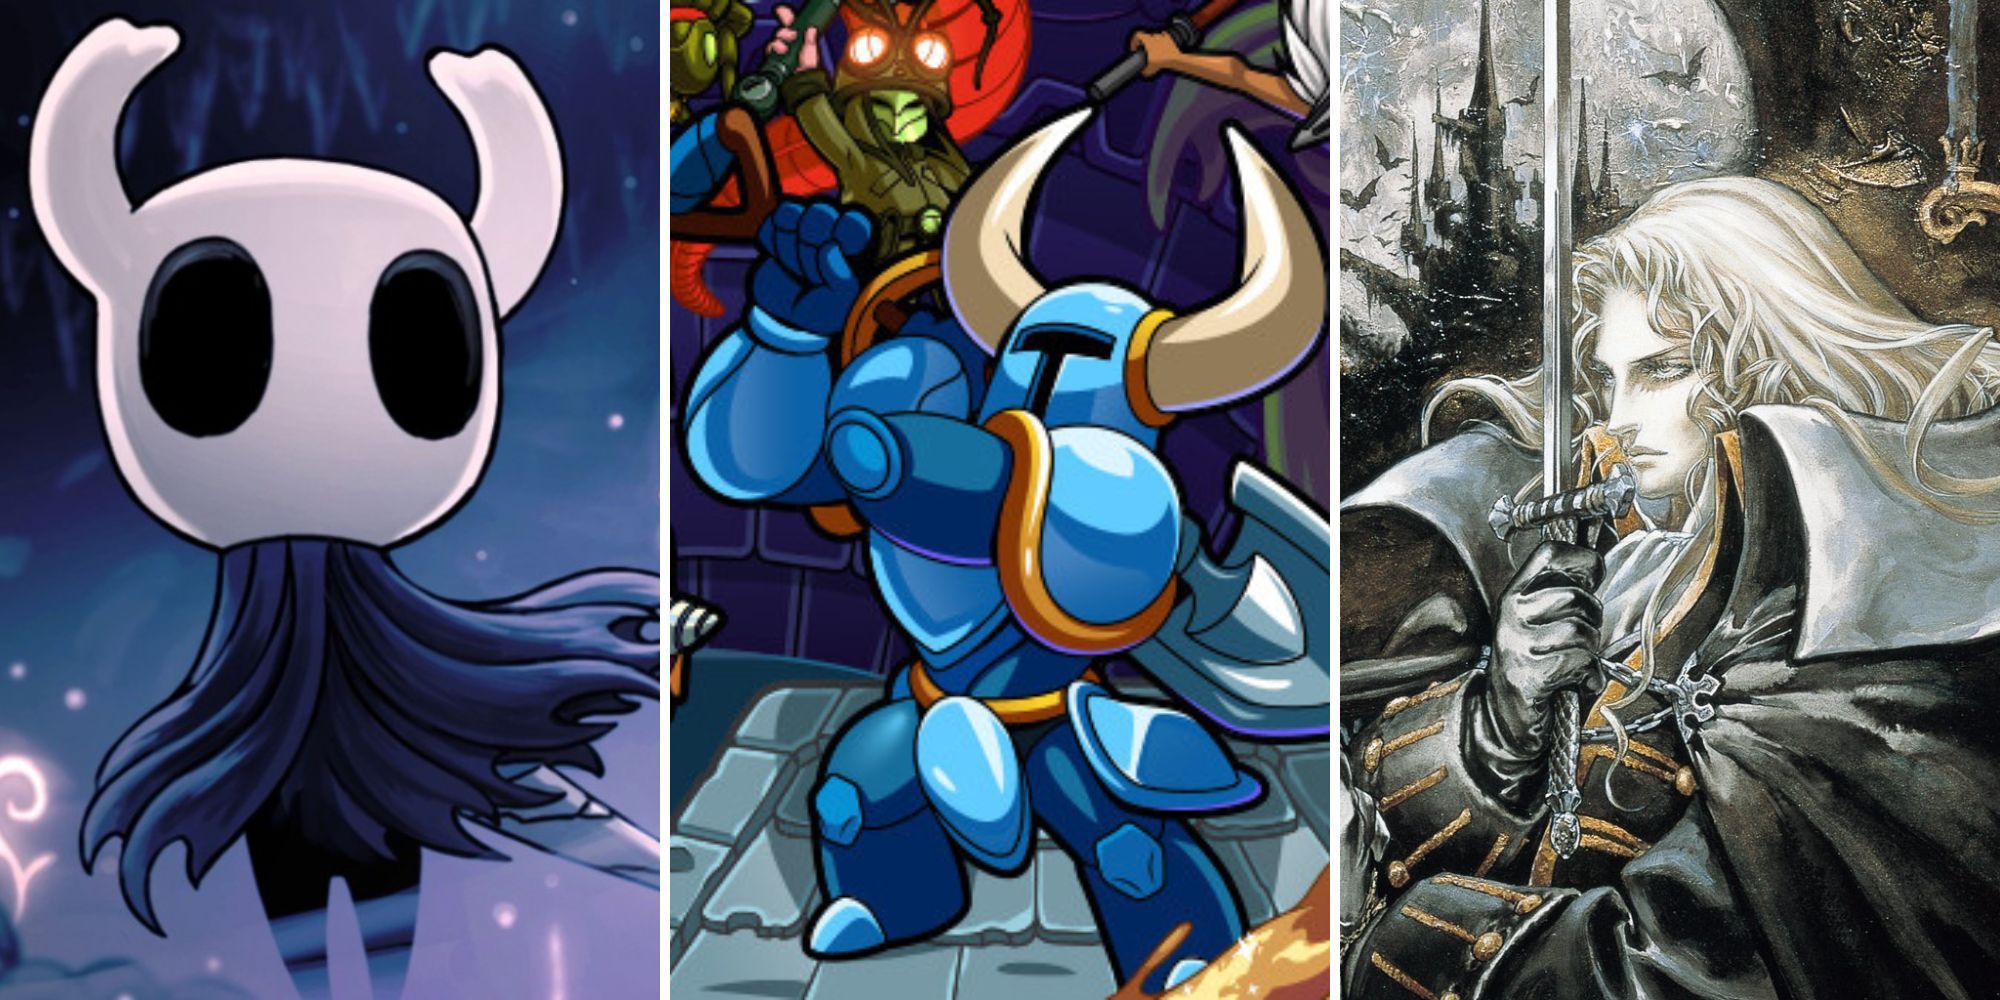 Collage of the Best Side Scrollers (Hollow Knight, Shovel Knight, Castlevania: Symphony of the Knight)